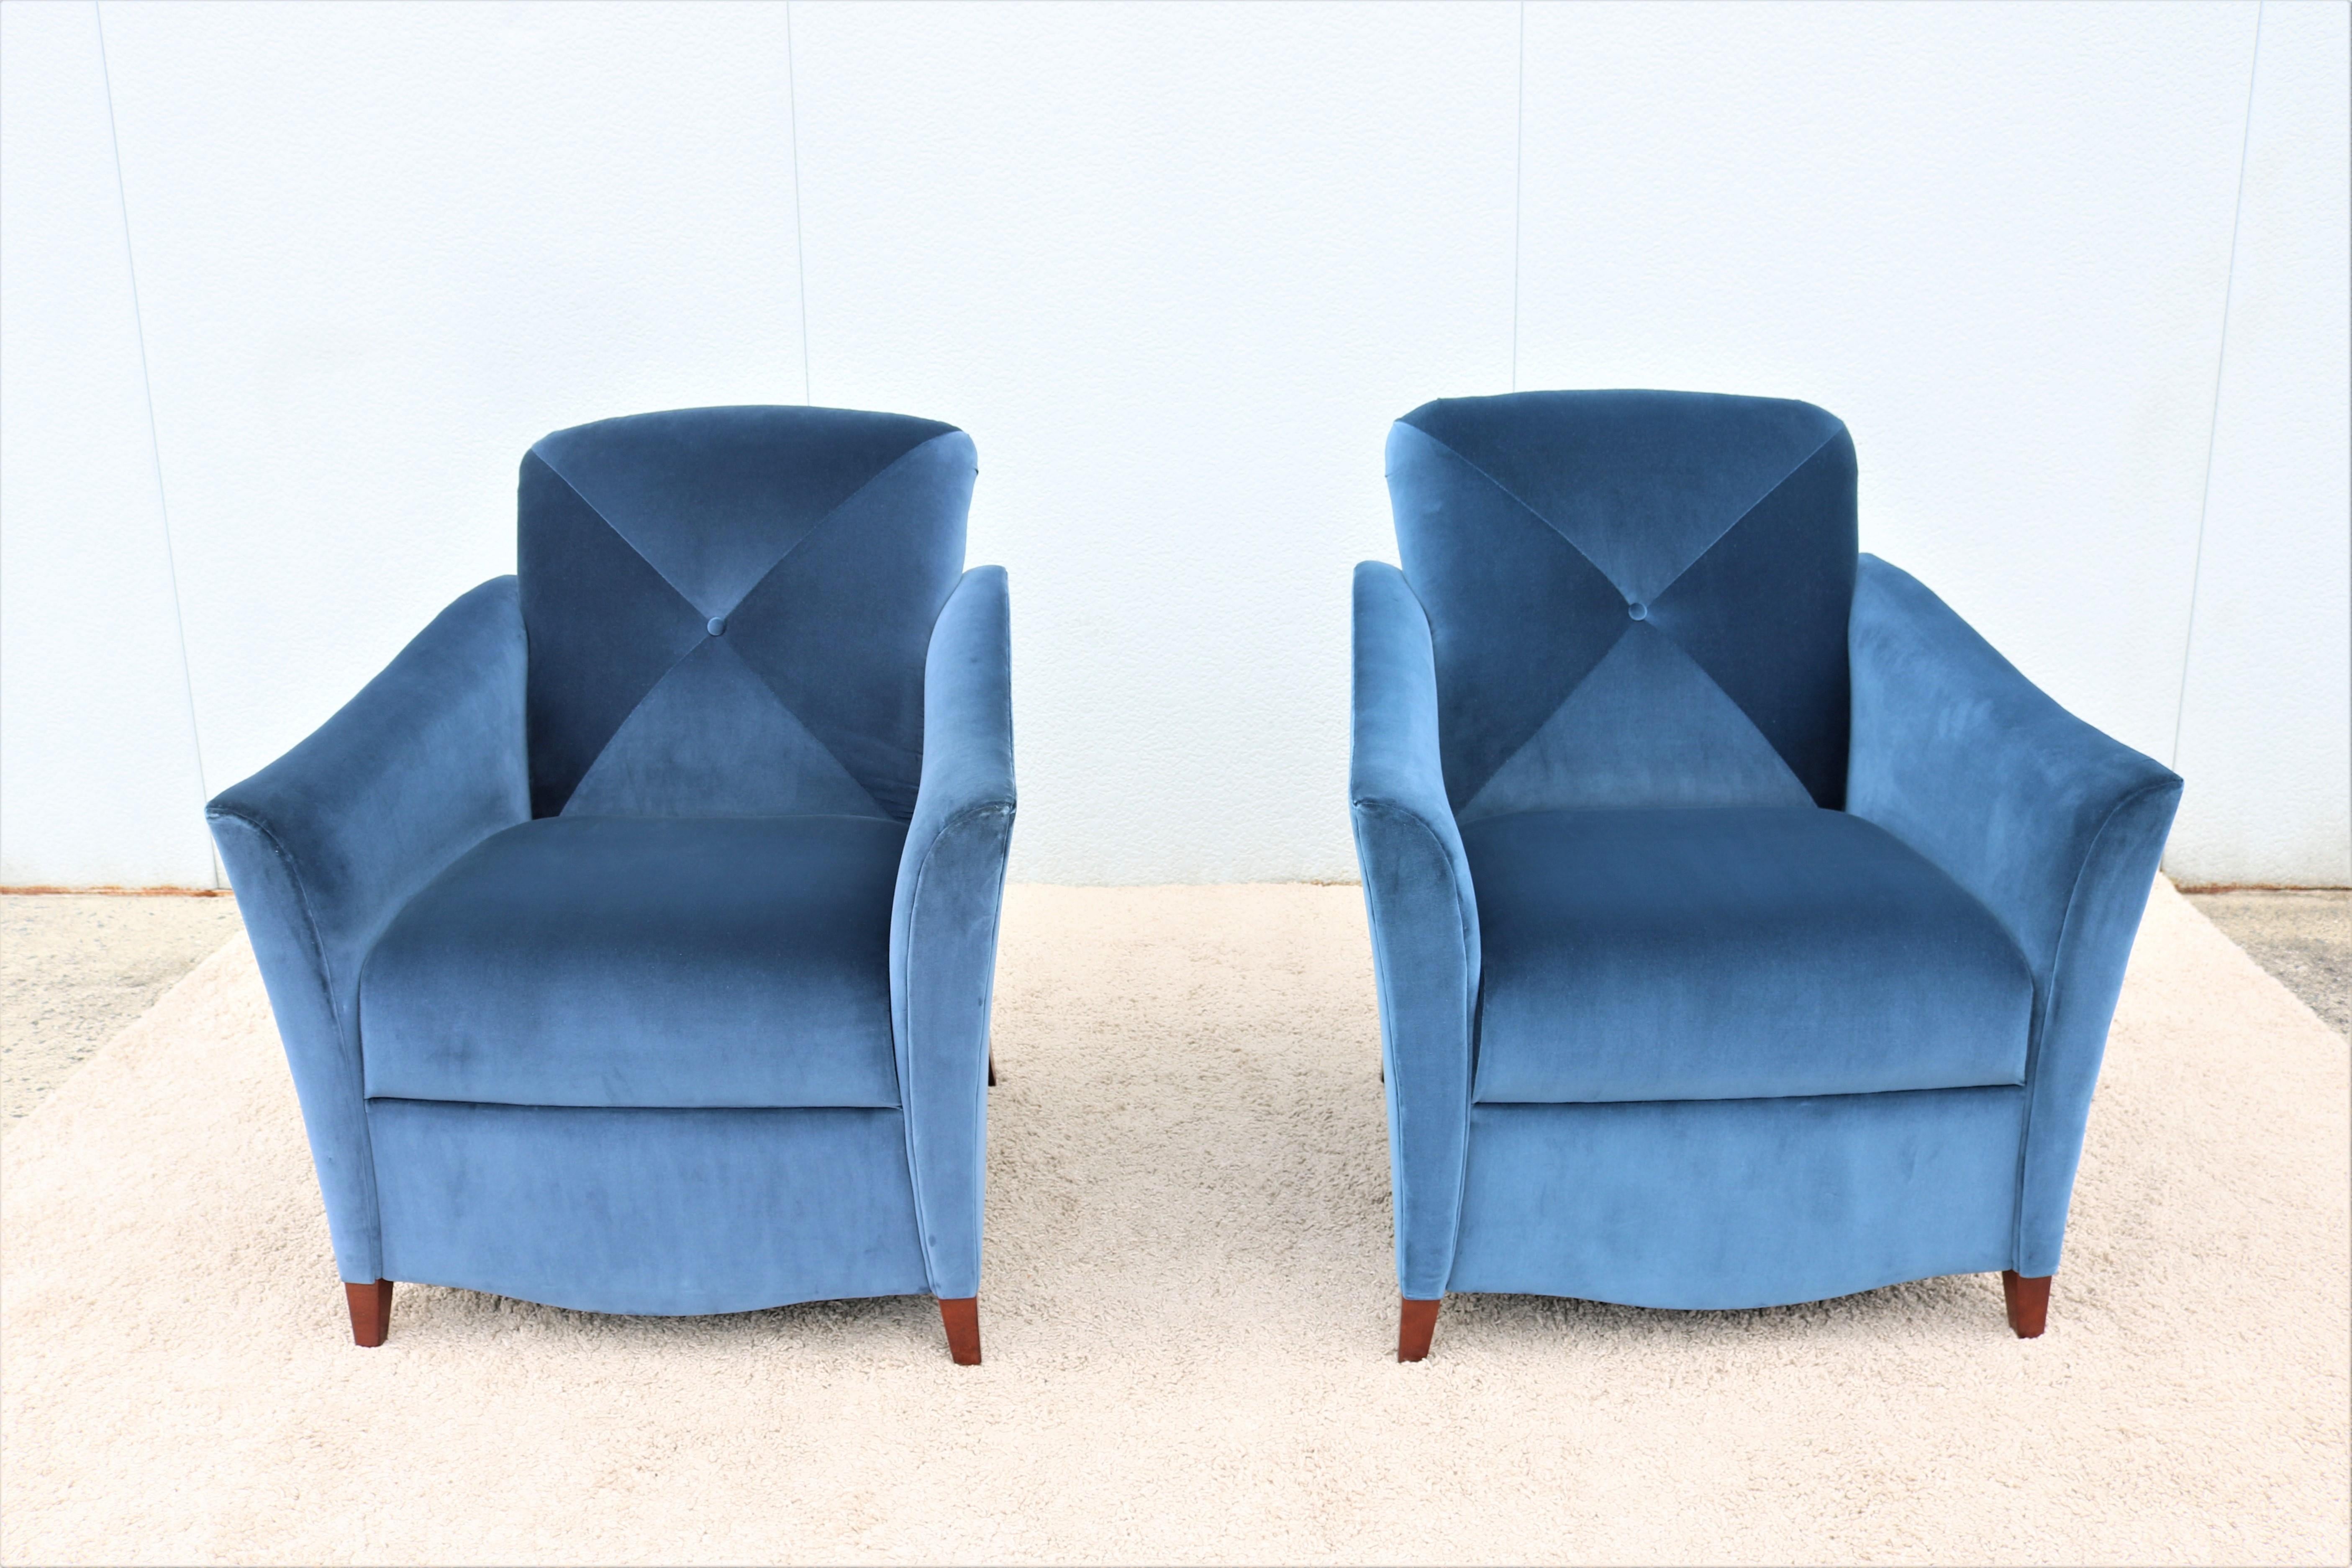 Hand-Crafted Art Deco Style Royal Blue Velvet Portrait Lounge Chairs by Jofco, a Pair For Sale